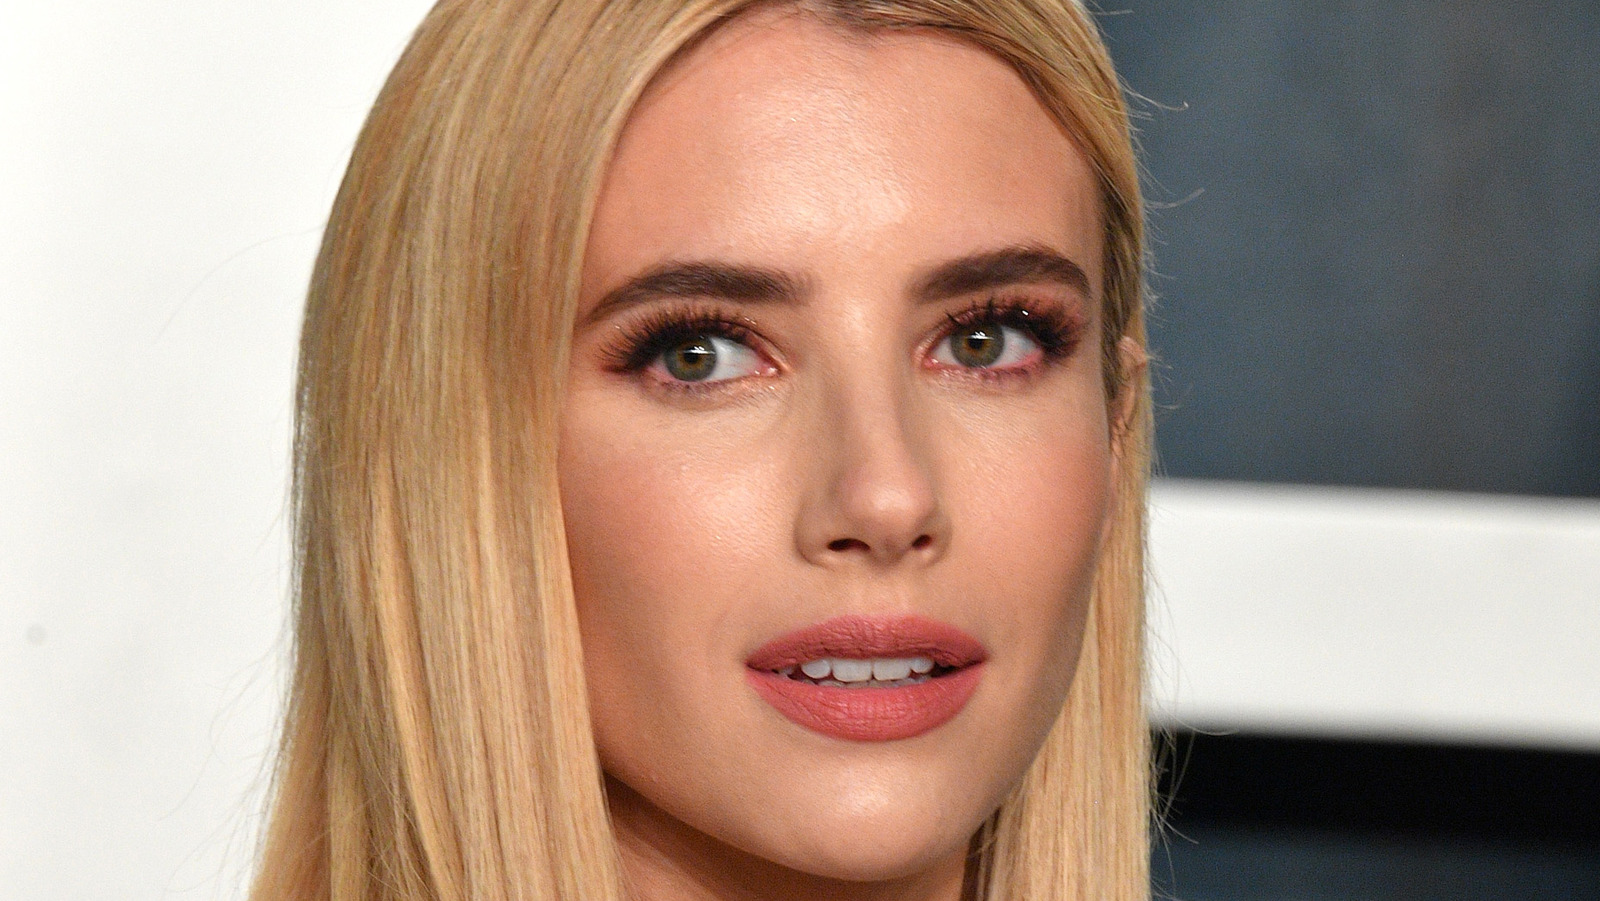 The Famous Godfather Of Emma Roberts' Baby Might Surprise You